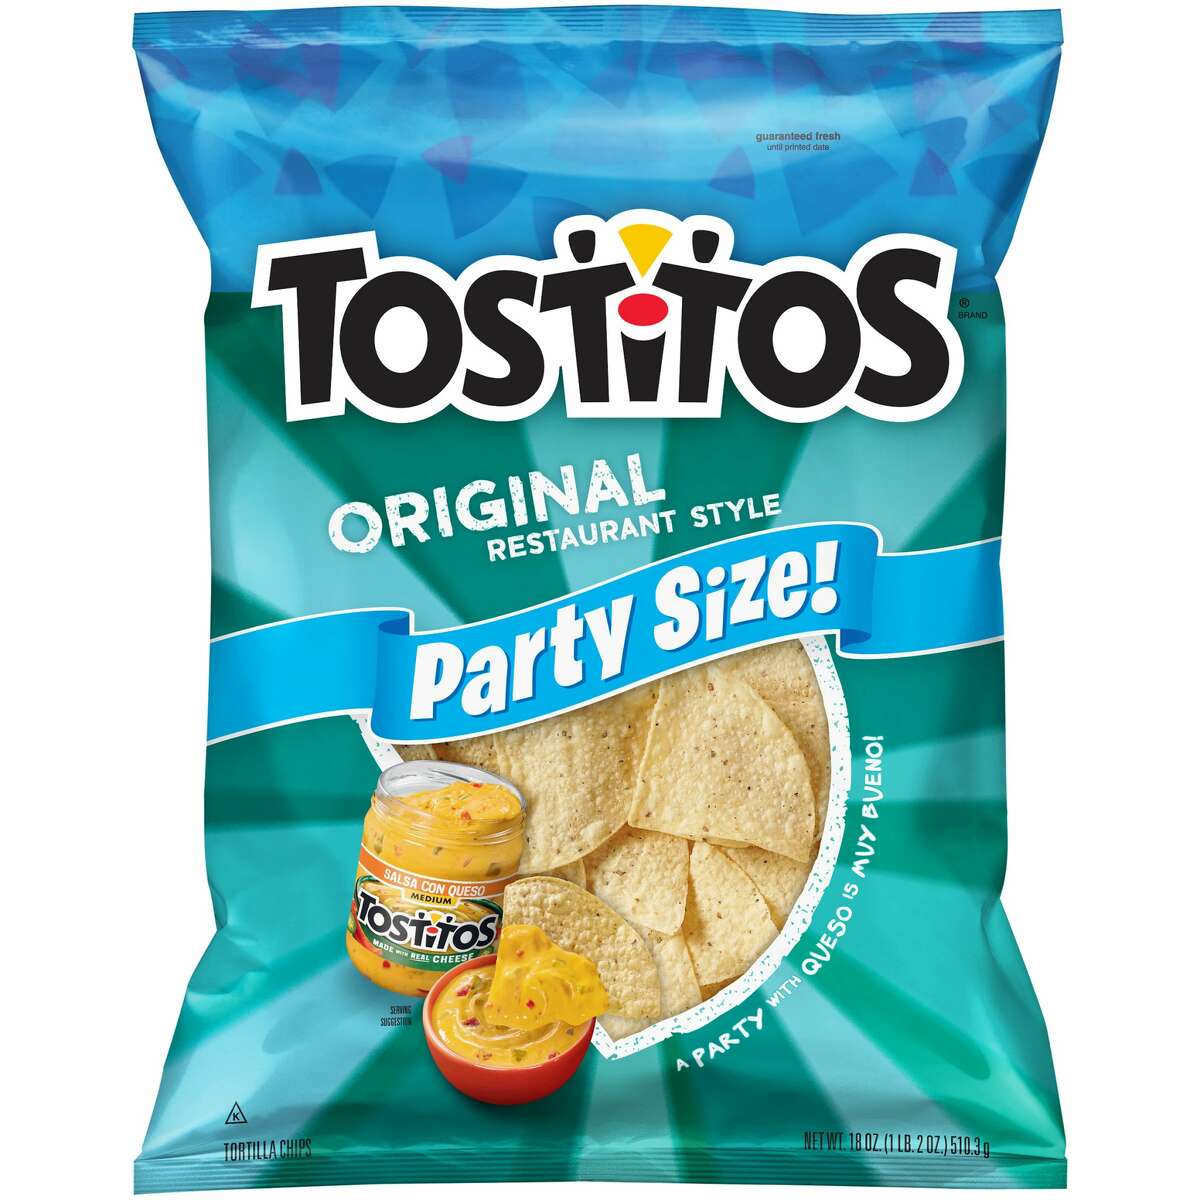 Tortilla chips: It’s not a party without tortilla chips here in West Texas, and Tostitos restaurant style chips in the 18 ounce “party size” bag were available everywhere. The best bargain was at Target, which sold the chips for $3.50 per bag. Walmart and H-E-B — as is often the case for numerous products — were priced the same at $3.98. Market Street and Super Mercado were the most expensive at $4.99.